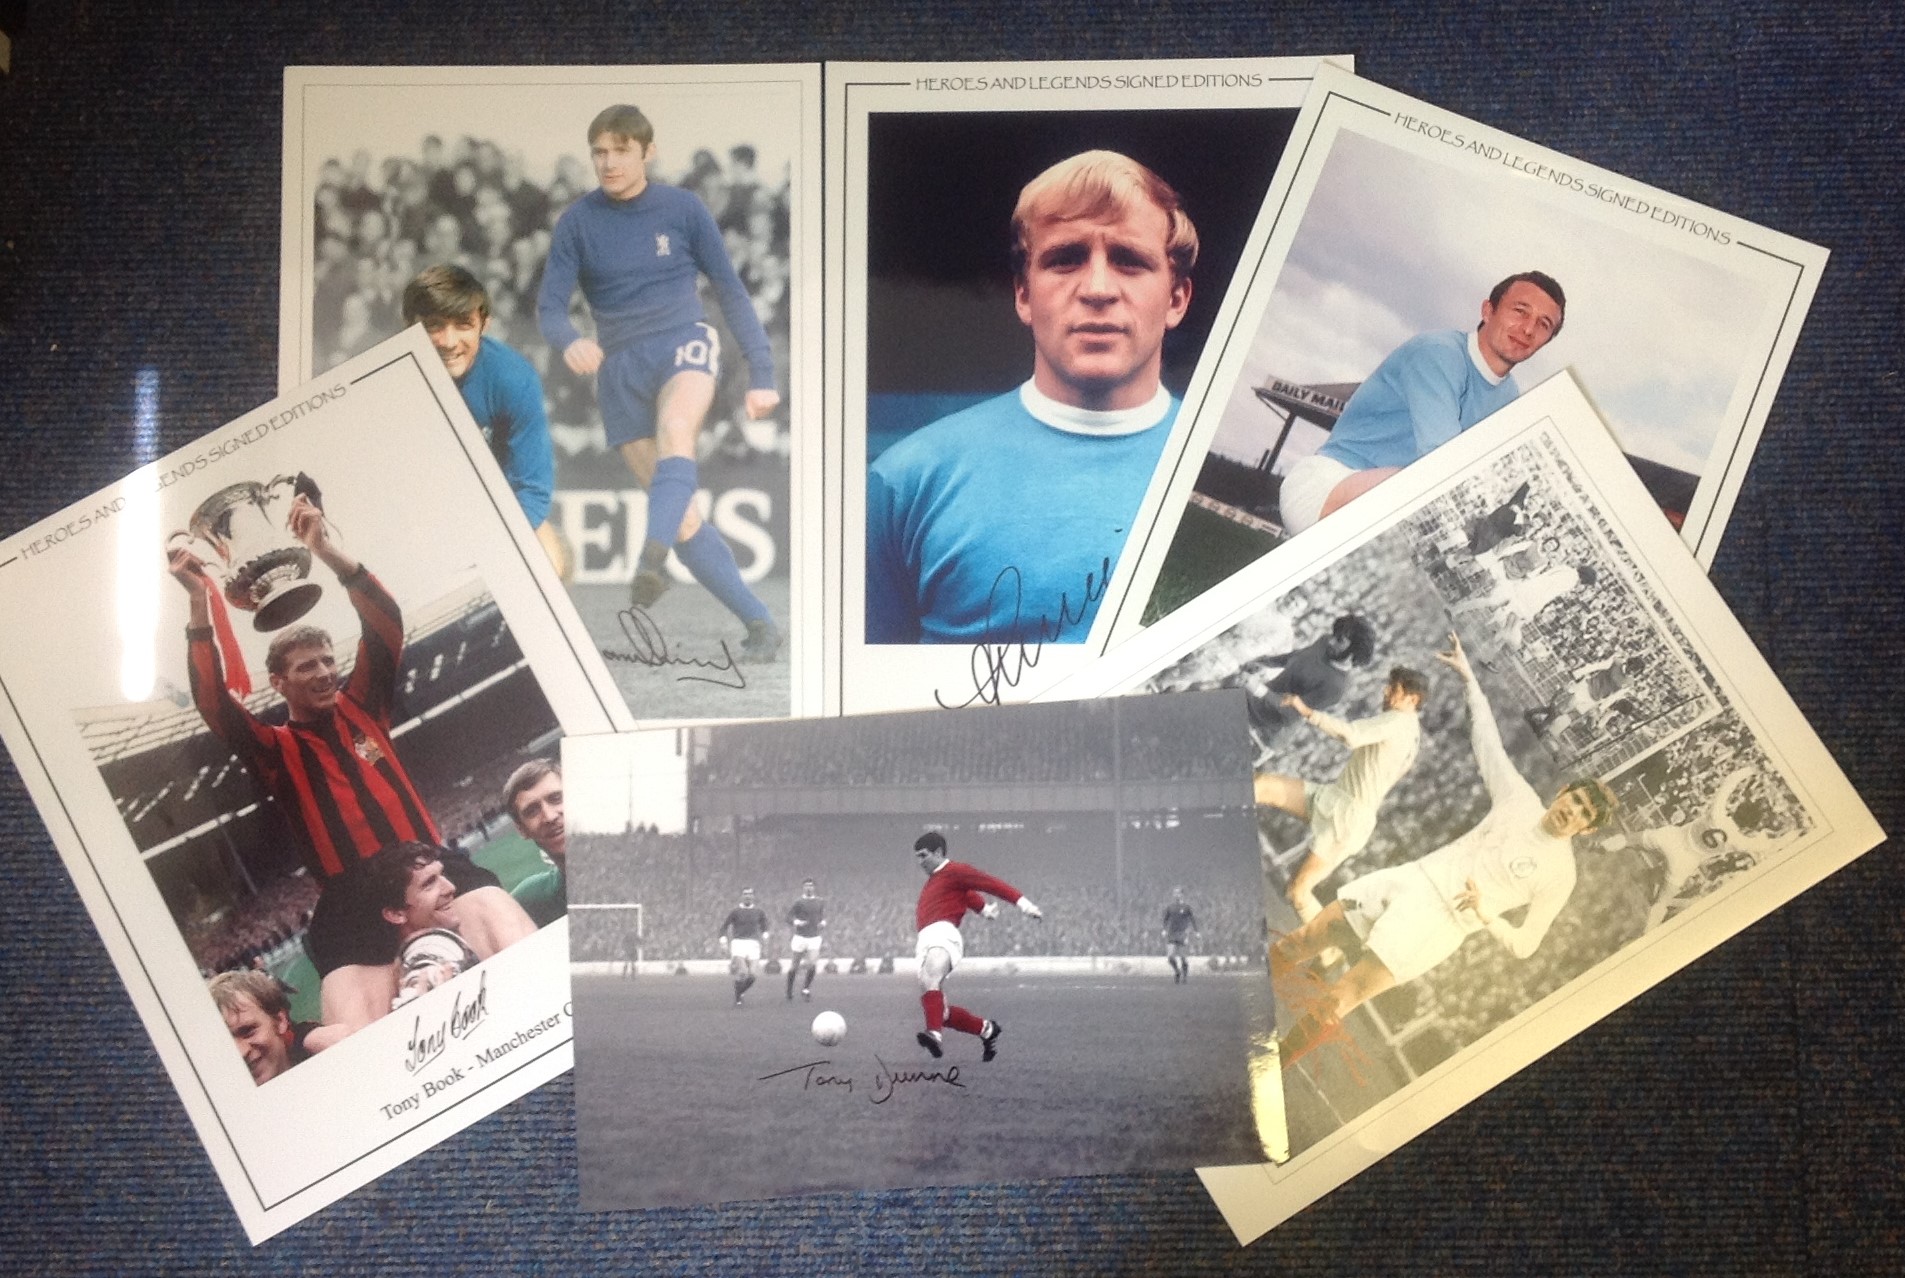 Football Legends collection 6, 16x12 montage colour and enhanced photos signed by legends such as